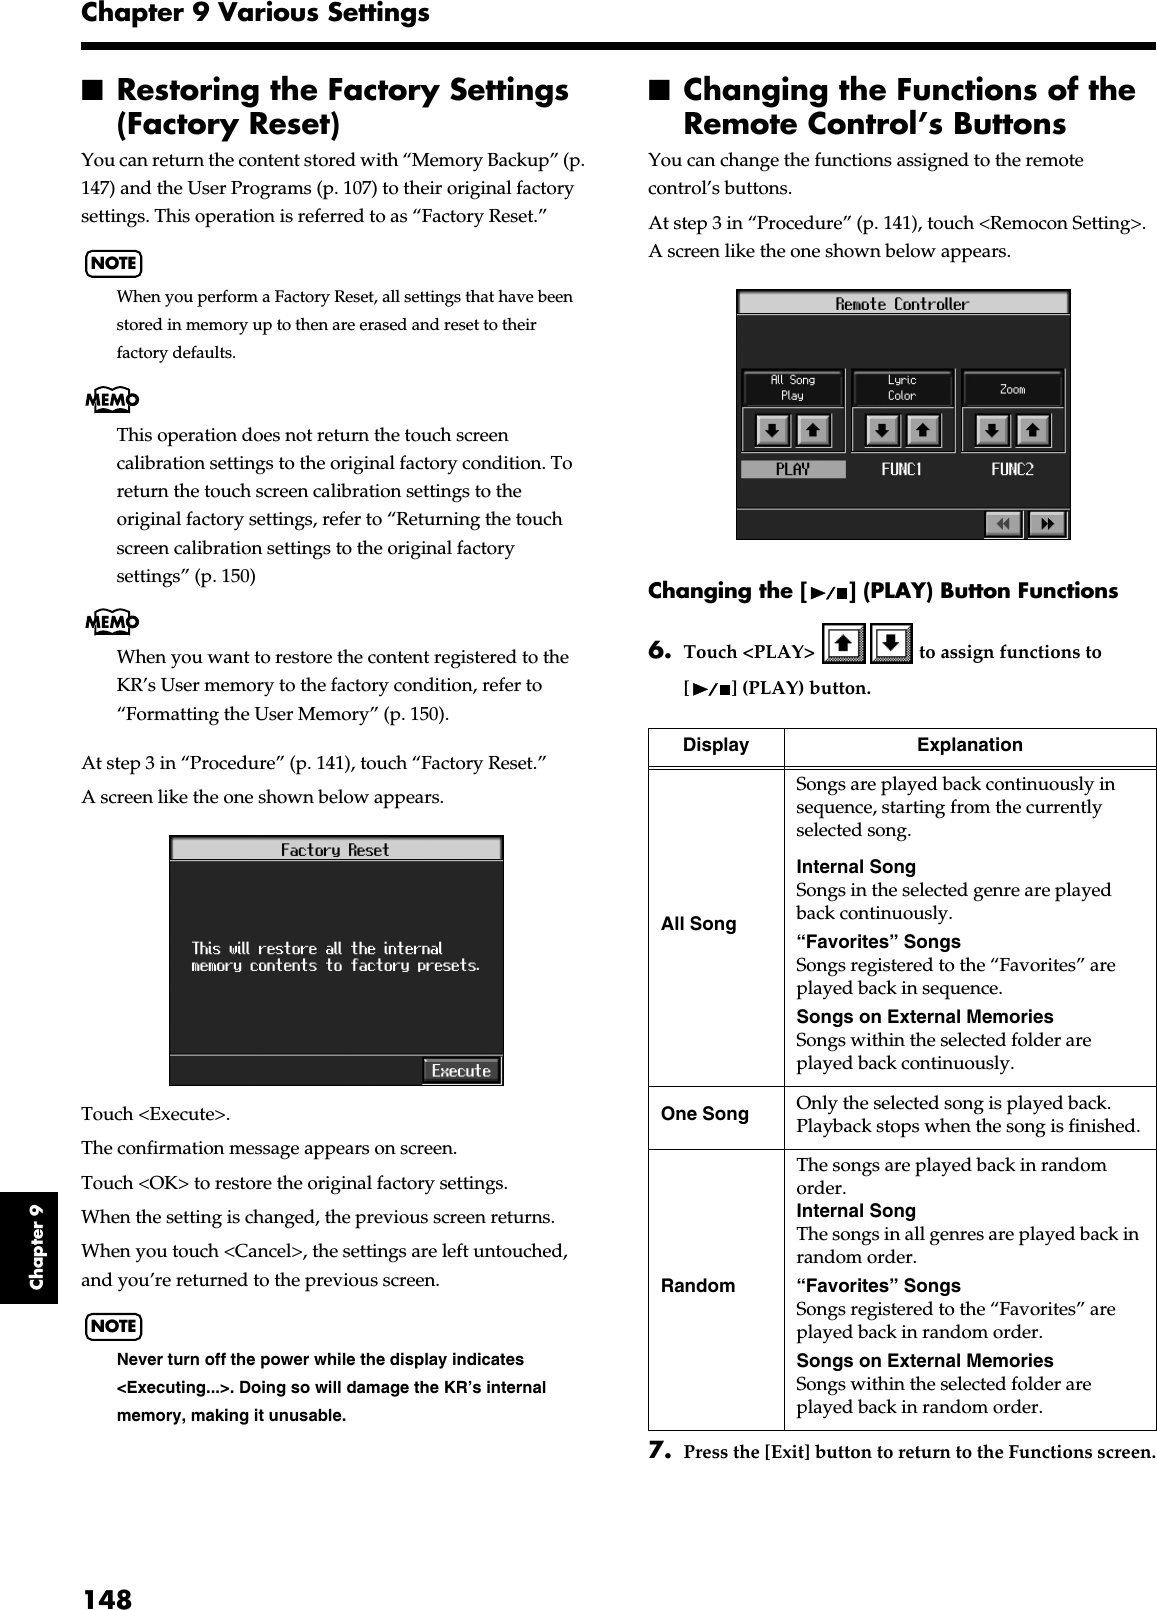 148Chapter 9 Various SettingsChapter 9■Restoring the Factory Settings (Factory Reset)You can return the content stored with “Memory Backup” (p. 147) and the User Programs (p. 107) to their original factory settings. This operation is referred to as “Factory Reset.”NOTEWhen you perform a Factory Reset, all settings that have been stored in memory up to then are erased and reset to their factory defaults.This operation does not return the touch screen calibration settings to the original factory condition. To return the touch screen calibration settings to the original factory settings, refer to “Returning the touch screen calibration settings to the original factory settings” (p. 150)When you want to restore the content registered to the KR’s User memory to the factory condition, refer to “Formatting the User Memory” (p. 150).At step 3 in “Procedure” (p. 141), touch “Factory Reset.”A screen like the one shown below appears.fig.d-factory.eps_50Touch &lt;Execute&gt;.The confirmation message appears on screen.Touch &lt;OK&gt; to restore the original factory settings.When the setting is changed, the previous screen returns.When you touch &lt;Cancel&gt;, the settings are left untouched, and you’re returned to the previous screen.NOTENever turn off the power while the display indicates &lt;Executing...&gt;. Doing so will damage the KR’s internal memory, making it unusable.■Changing the Functions of the Remote Control’s Buttons You can change the functions assigned to the remote control’s buttons.At step 3 in “Procedure” (p. 141), touch &lt;Remocon Setting&gt;.A screen like the one shown below appears.Changing the [ ] (PLAY) Button Functions6. Touch &lt;PLAY&gt;   to assign functions to [ ] (PLAY) button.7. Press the [Exit] button to return to the Functions screen.Display ExplanationAll SongSongs are played back continuously in sequence, starting from the currently selected song.Internal SongSongs in the selected genre are played back continuously.“Favorites” SongsSongs registered to the “Favorites” are played back in sequence.Songs on External MemoriesSongs within the selected folder are played back continuously.One Song Only the selected song is played back. Playback stops when the song is finished.RandomThe songs are played back in random order.Internal SongThe songs in all genres are played back in random order.“Favorites” SongsSongs registered to the “Favorites” are played back in random order.Songs on External MemoriesSongs within the selected folder are played back in random order.